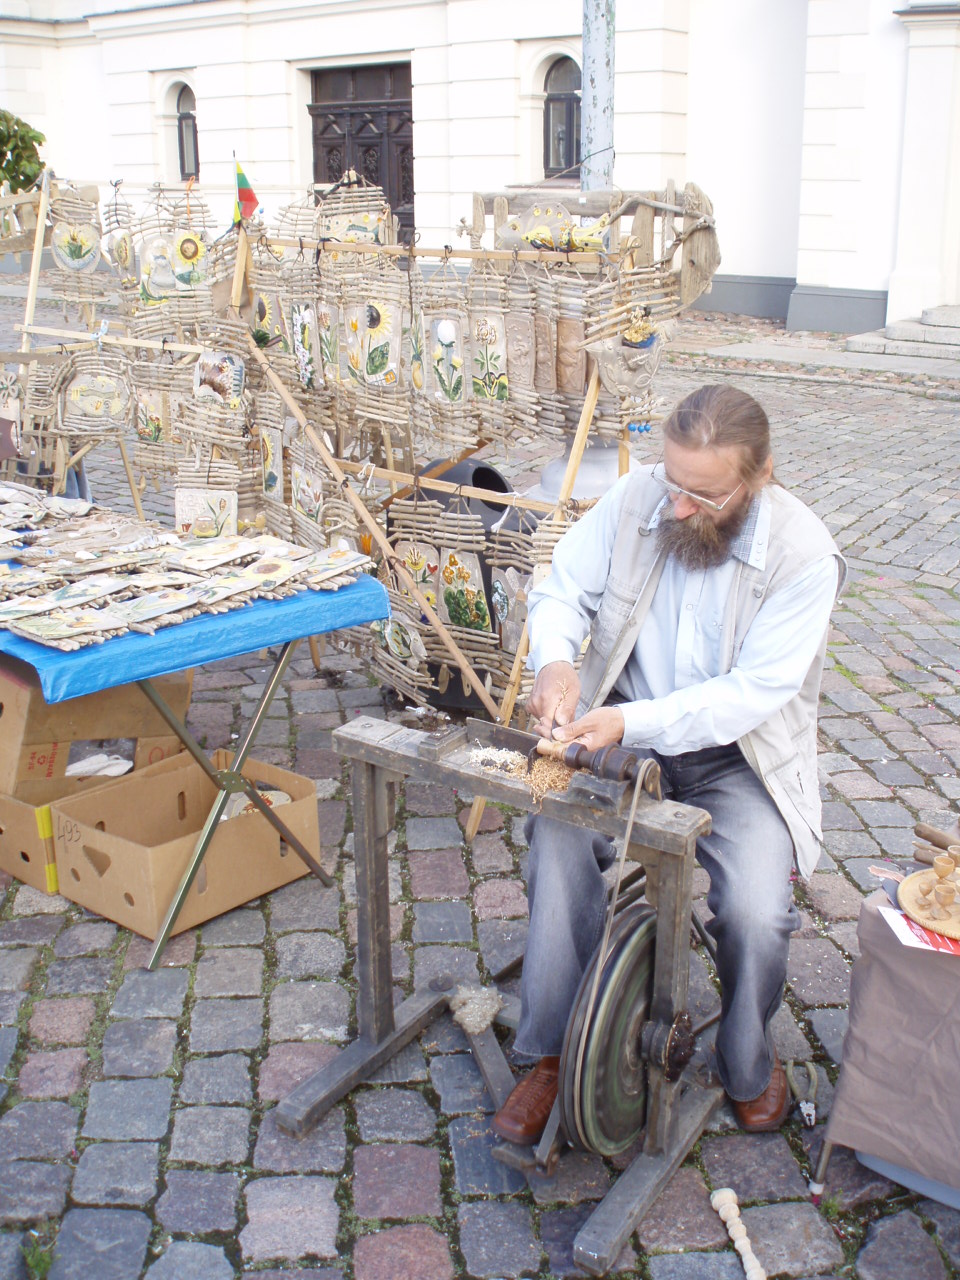 a man working with wooden things outside on his bike